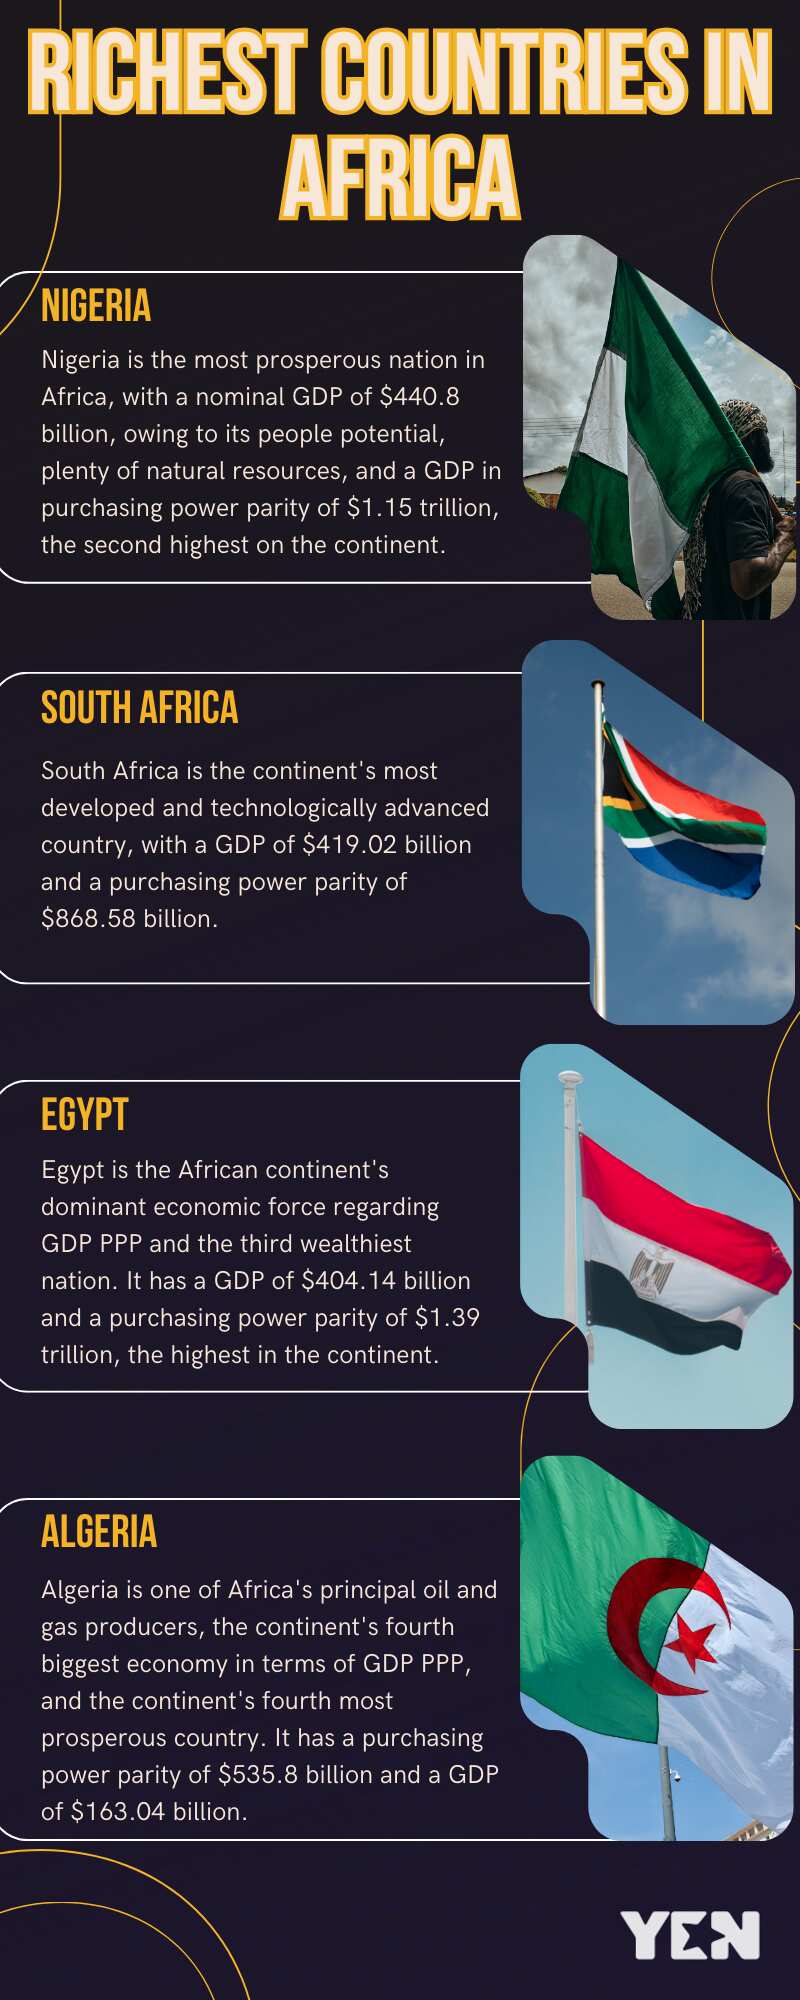 Richest countries in Africa